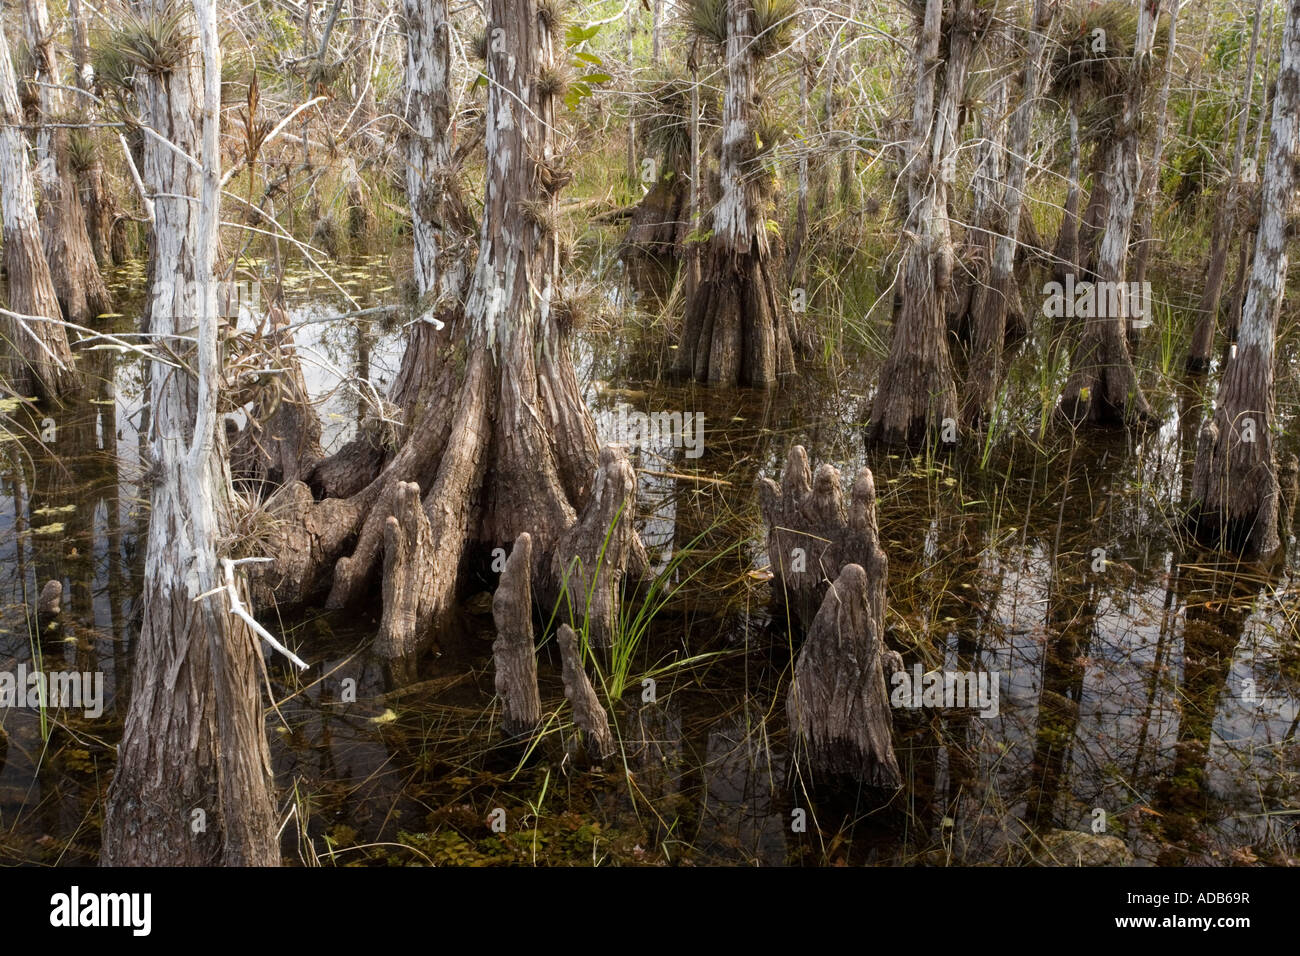 Pond cypress swamp in the Everglades National Park Stock Photo